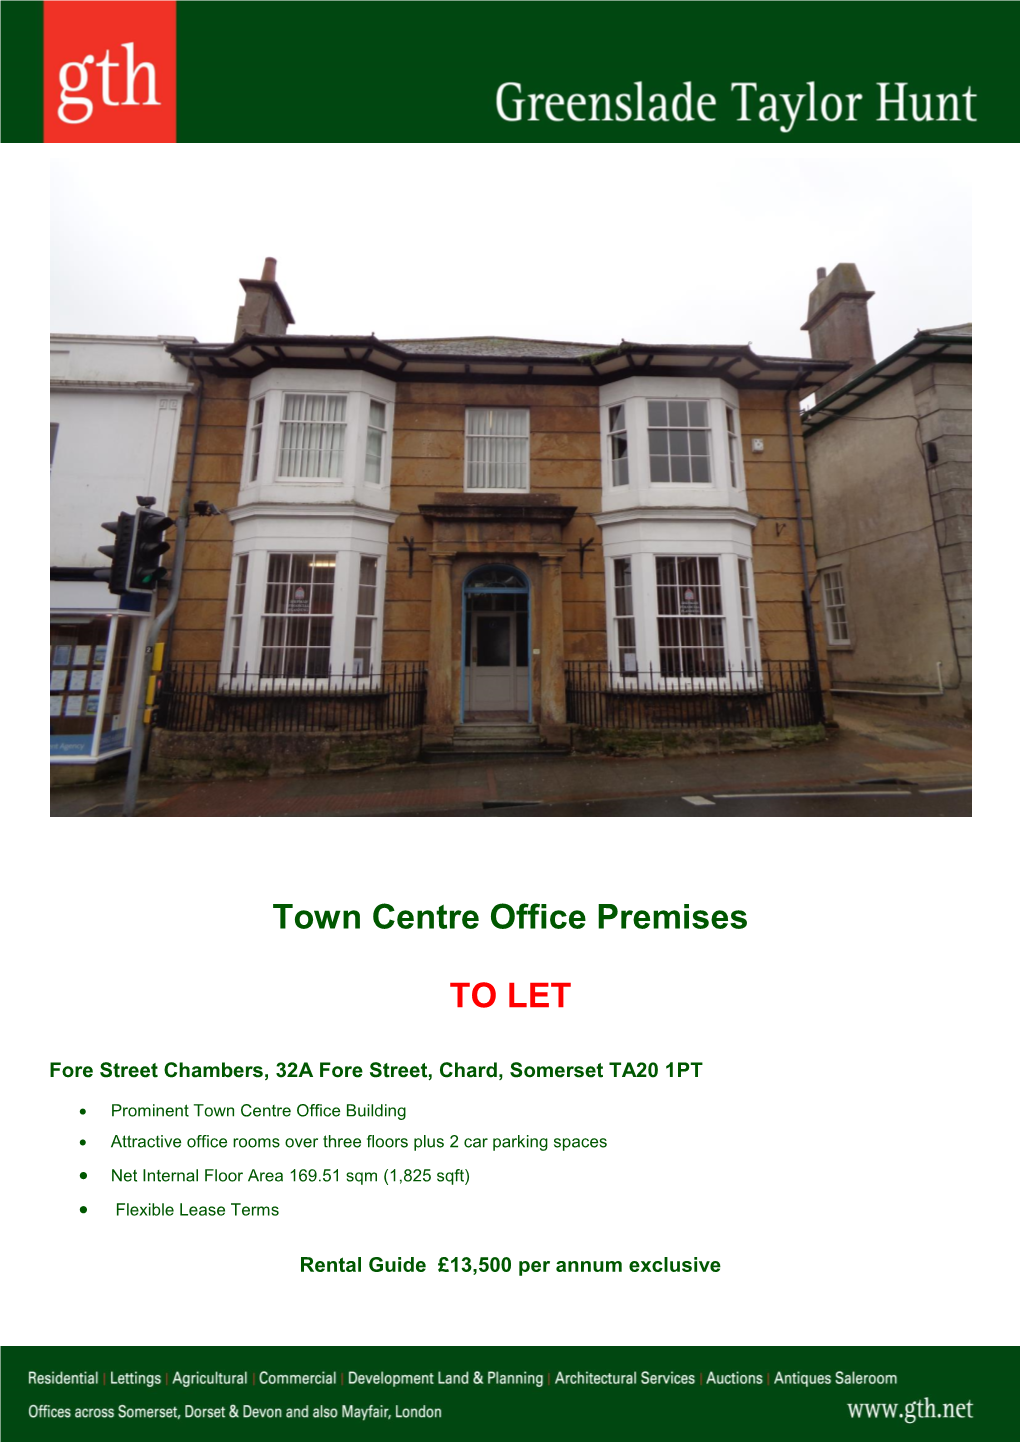 Town Centre Office Premises TO